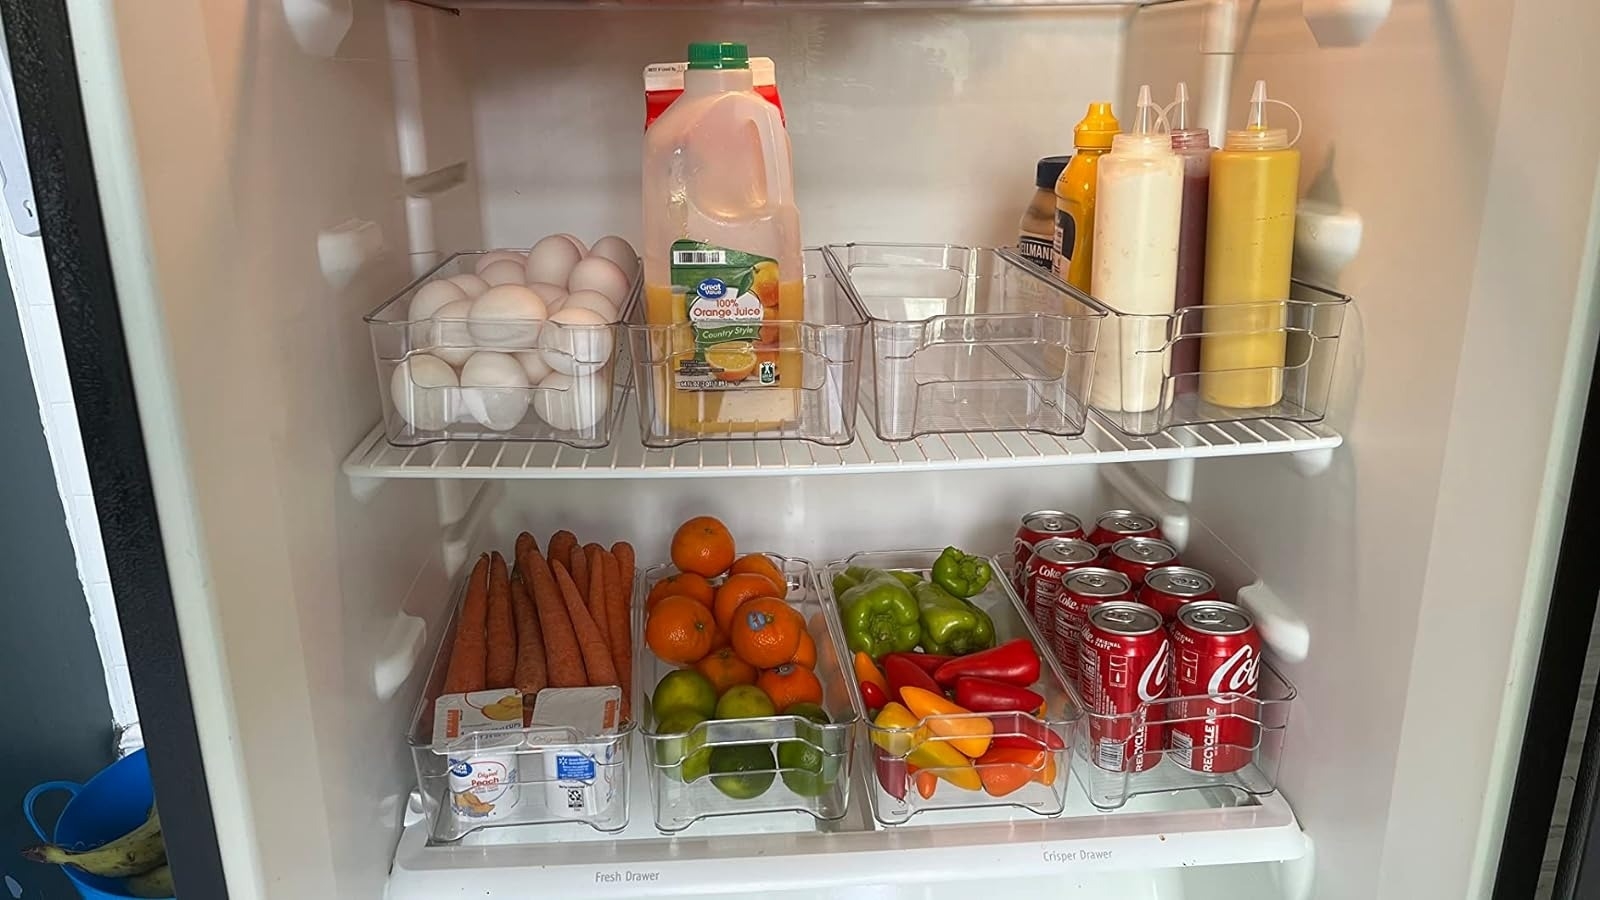 Organized fridge interior with clear storage bins containing drinks, fruits, and dairy products for efficient space use